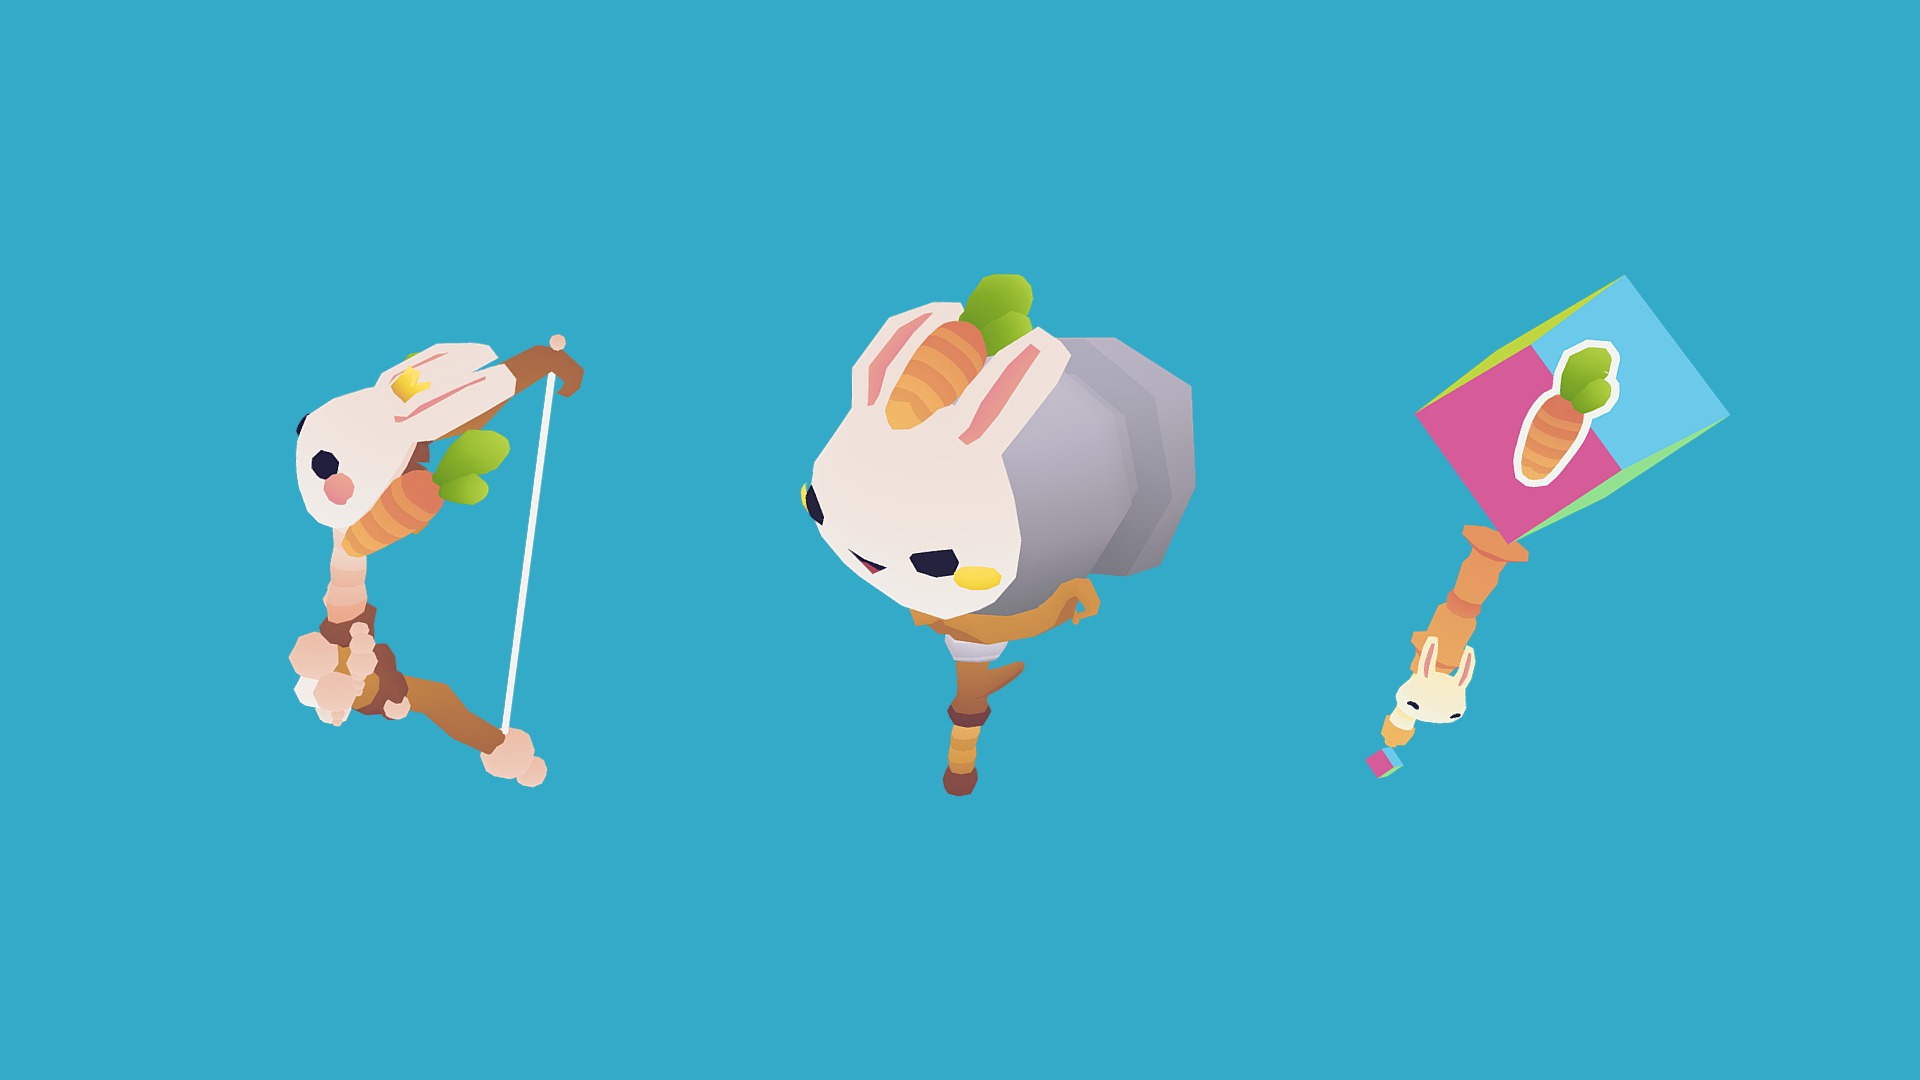 3D model RPG ITEMS #6 – Bunny Theme - This is a 3D model of the RPG ITEMS #6 - Bunny Theme. The 3D model is about background pattern.